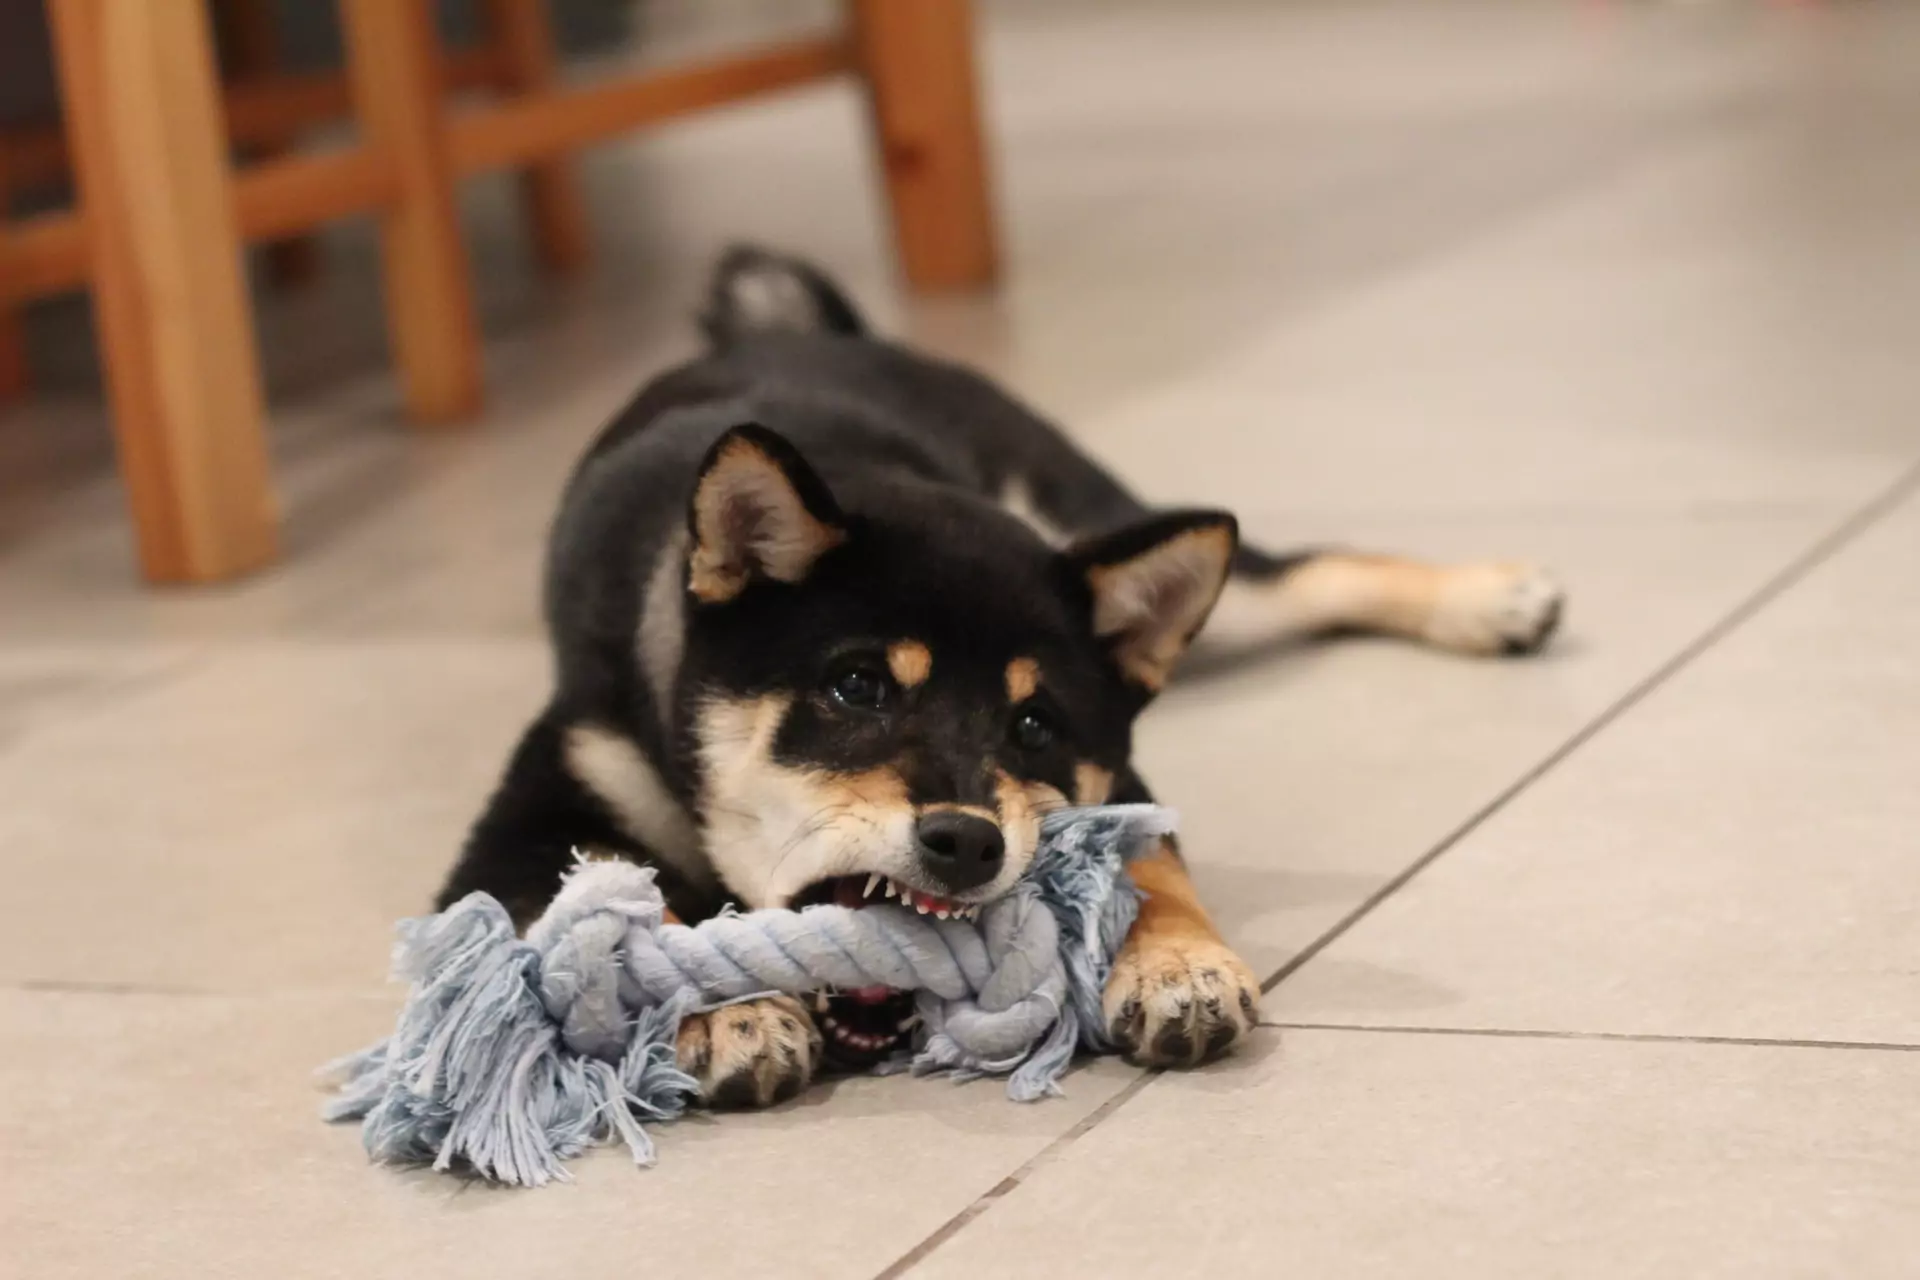 dog with black and brown fur chewing on a grey rope toy